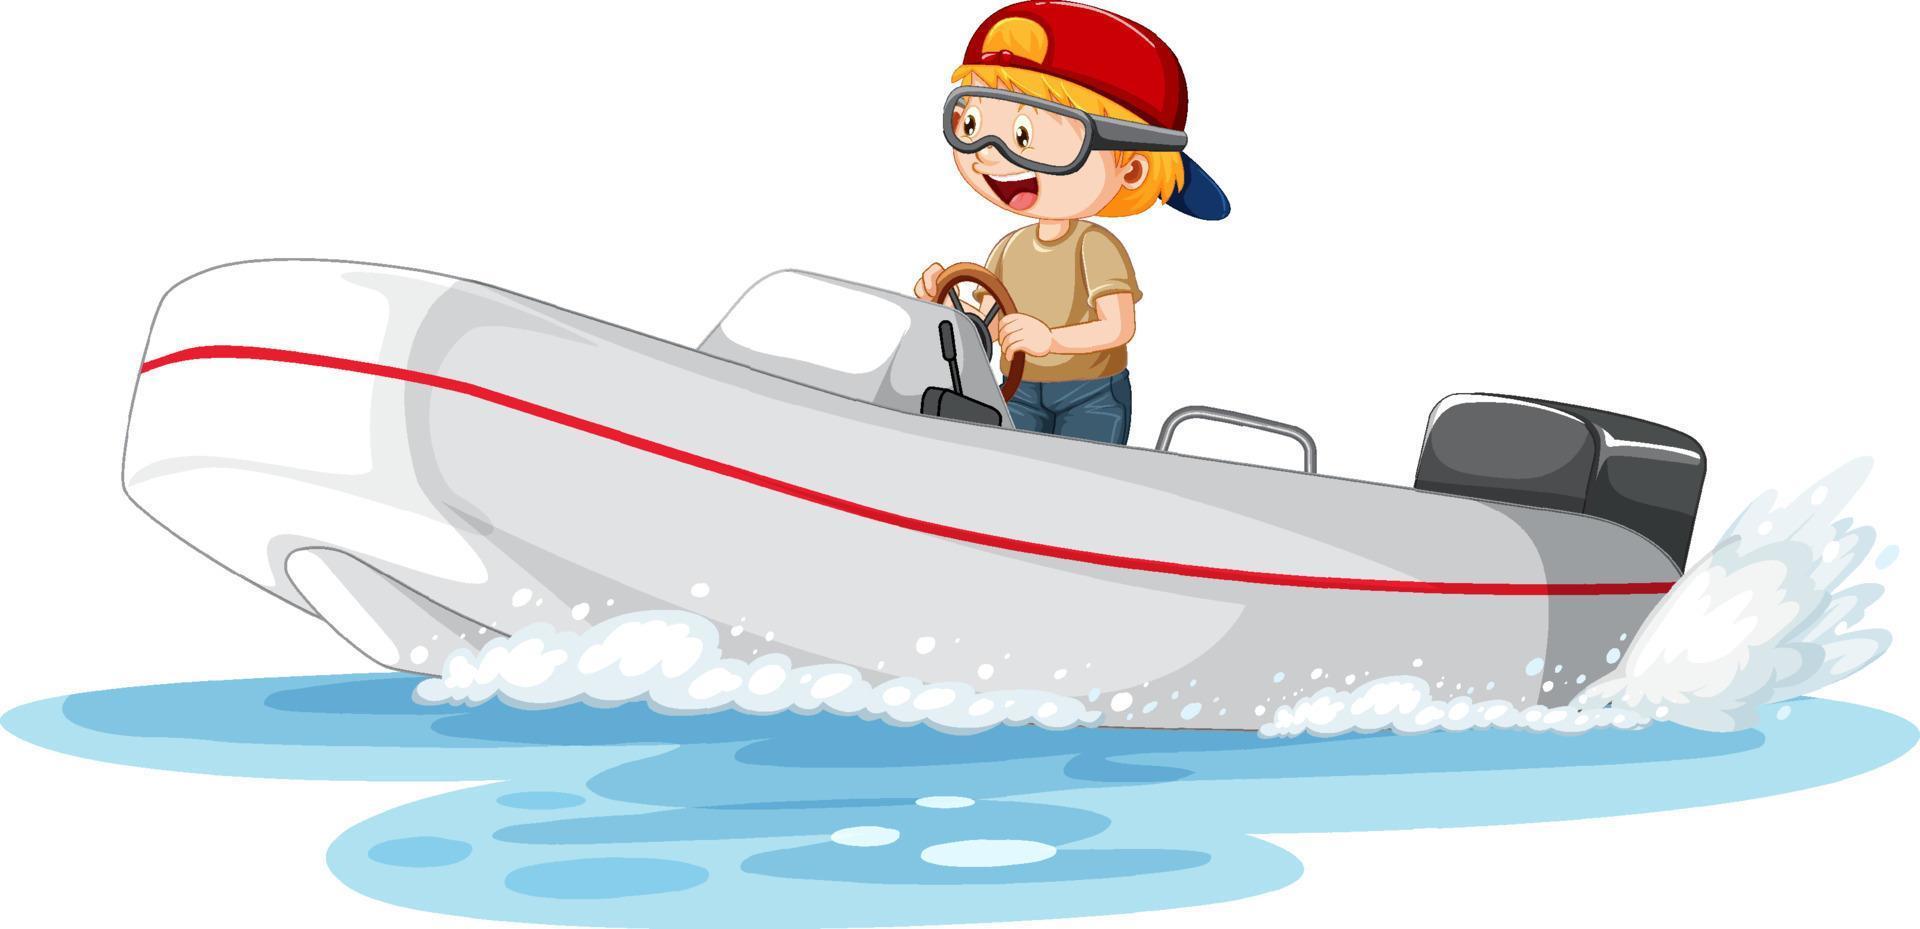 A boy driving motorboat in cartoon style vector